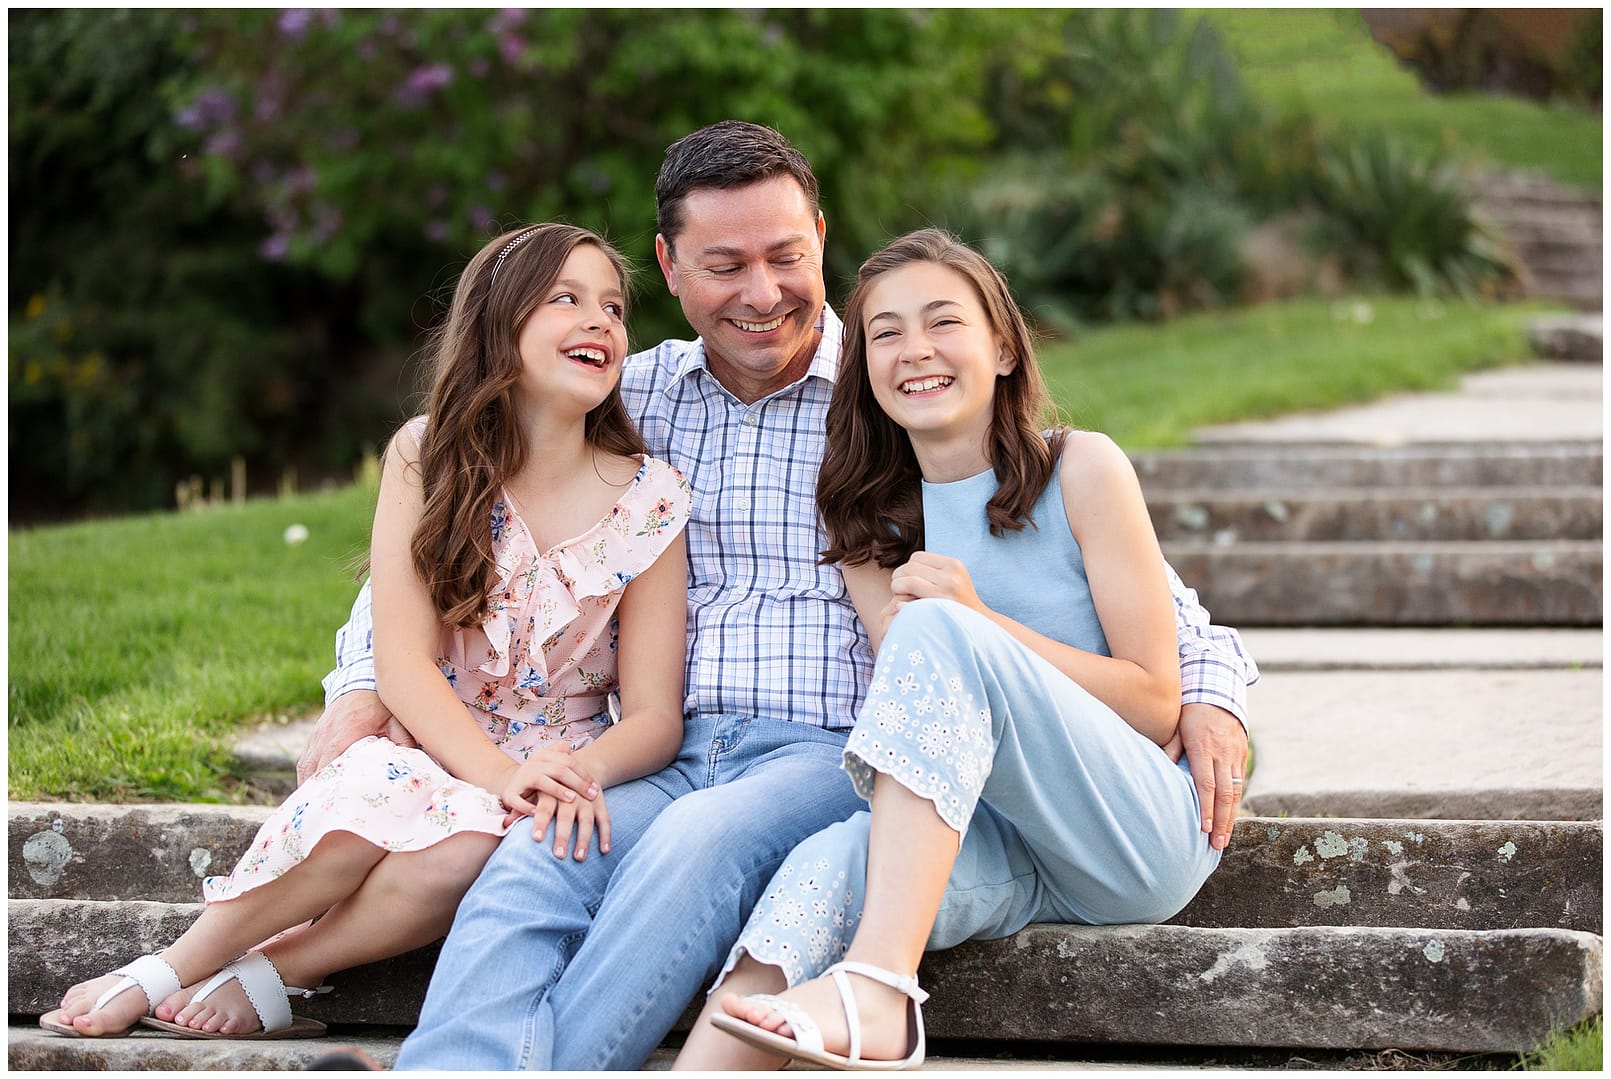 Girls pose with their dad. Photos by Tiffany Hix Photography.